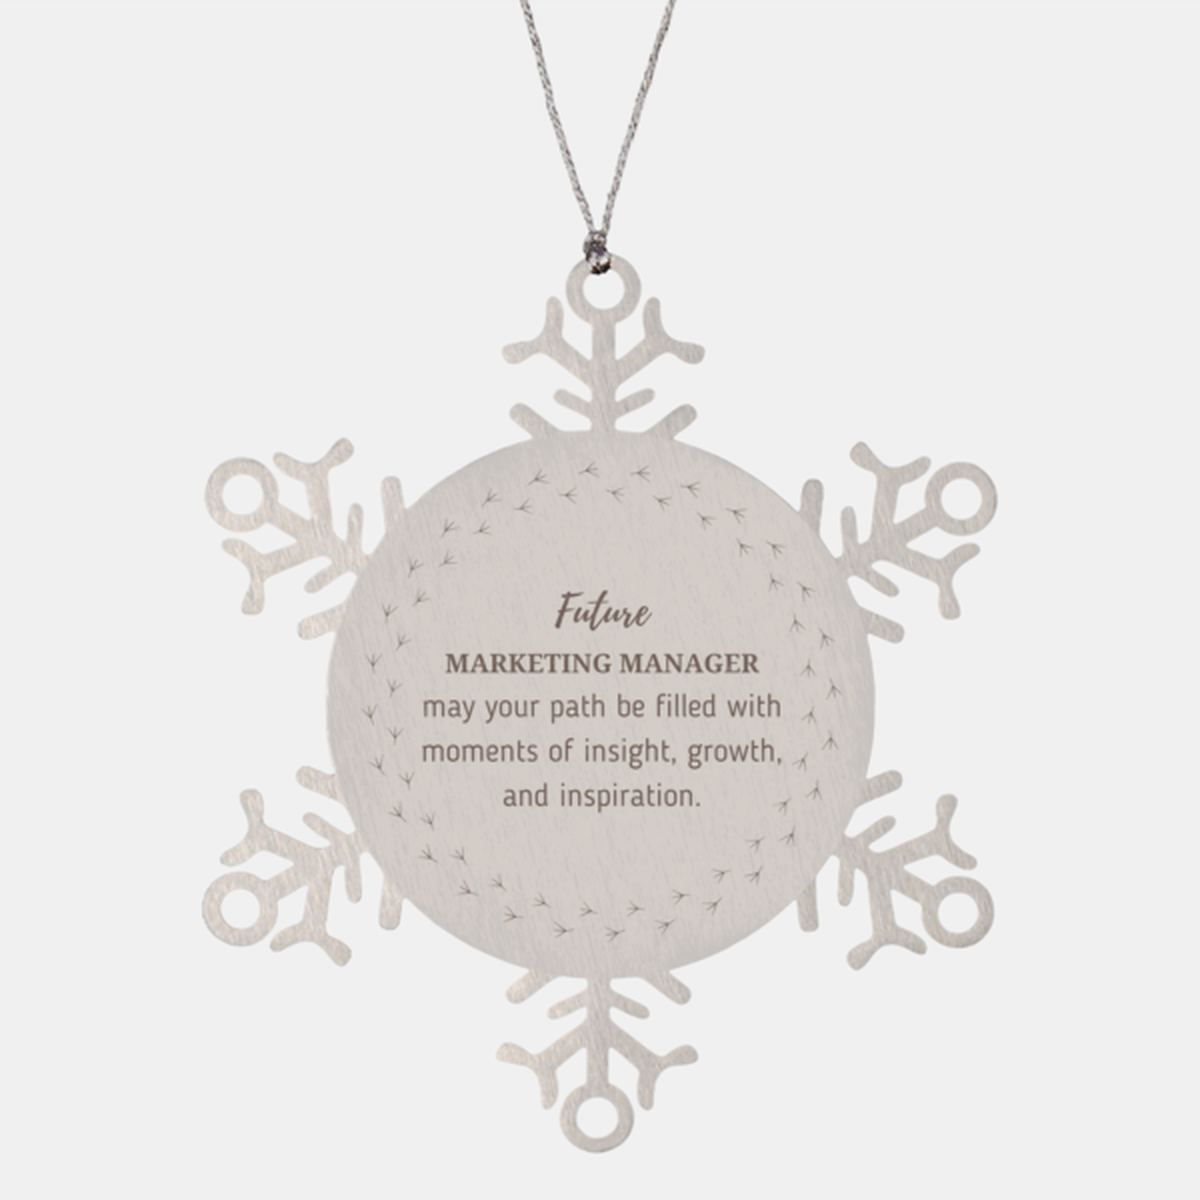 Future Marketing Manager Gifts, May your path be filled with moments of insight, Graduation Gifts for New Marketing Manager, Christmas Unique Snowflake Ornament For Men, Women, Friends